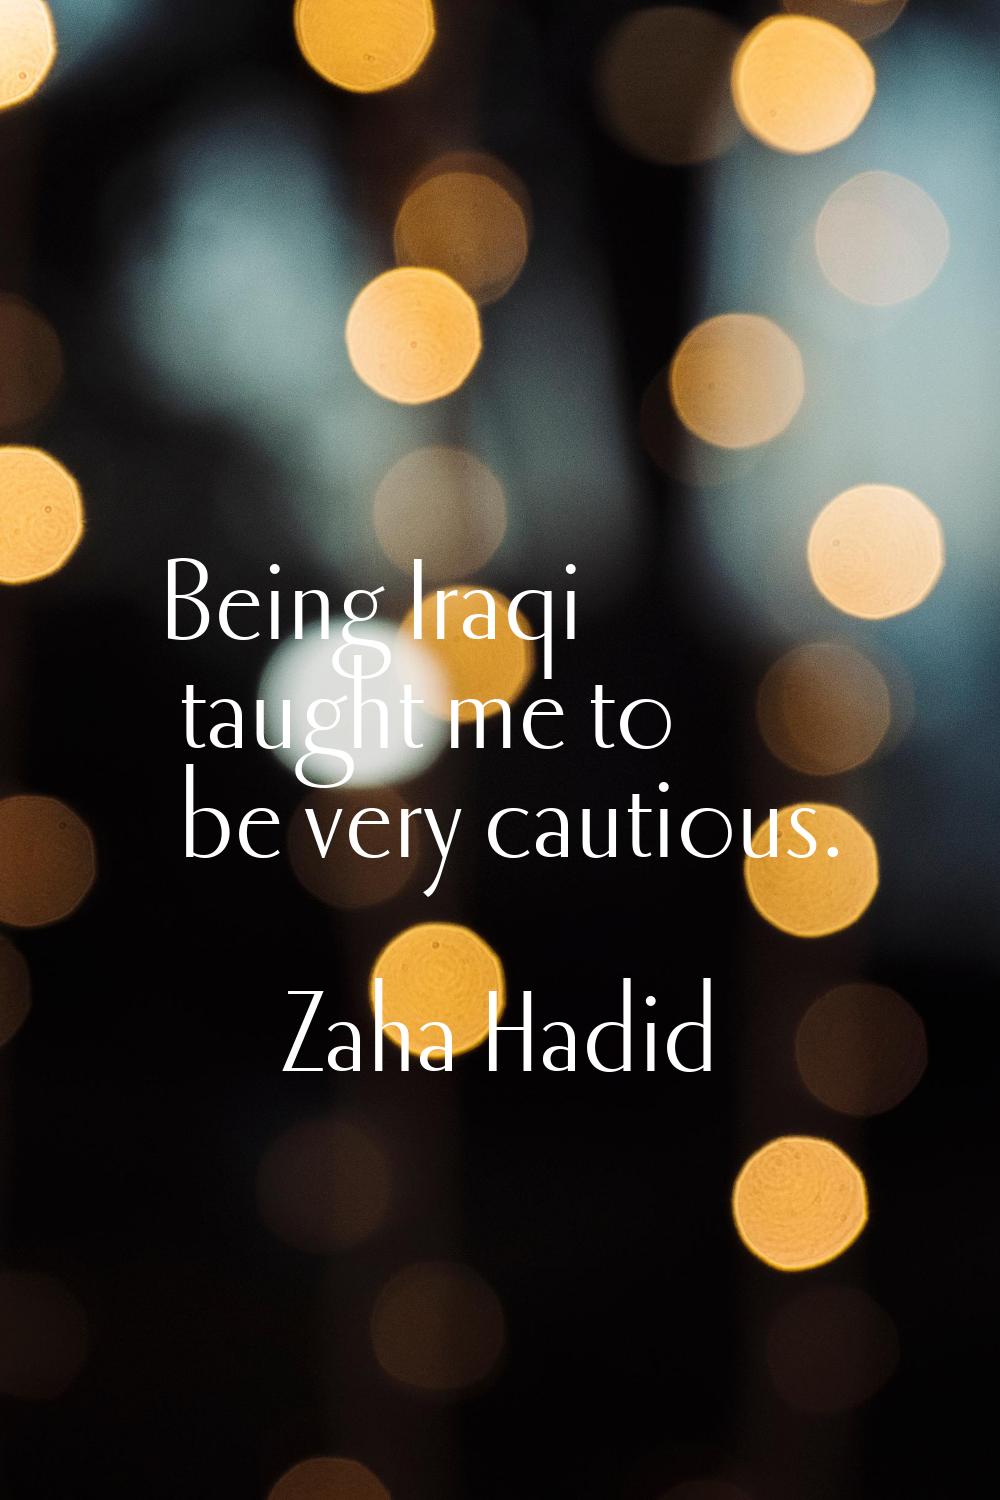 Being Iraqi taught me to be very cautious.